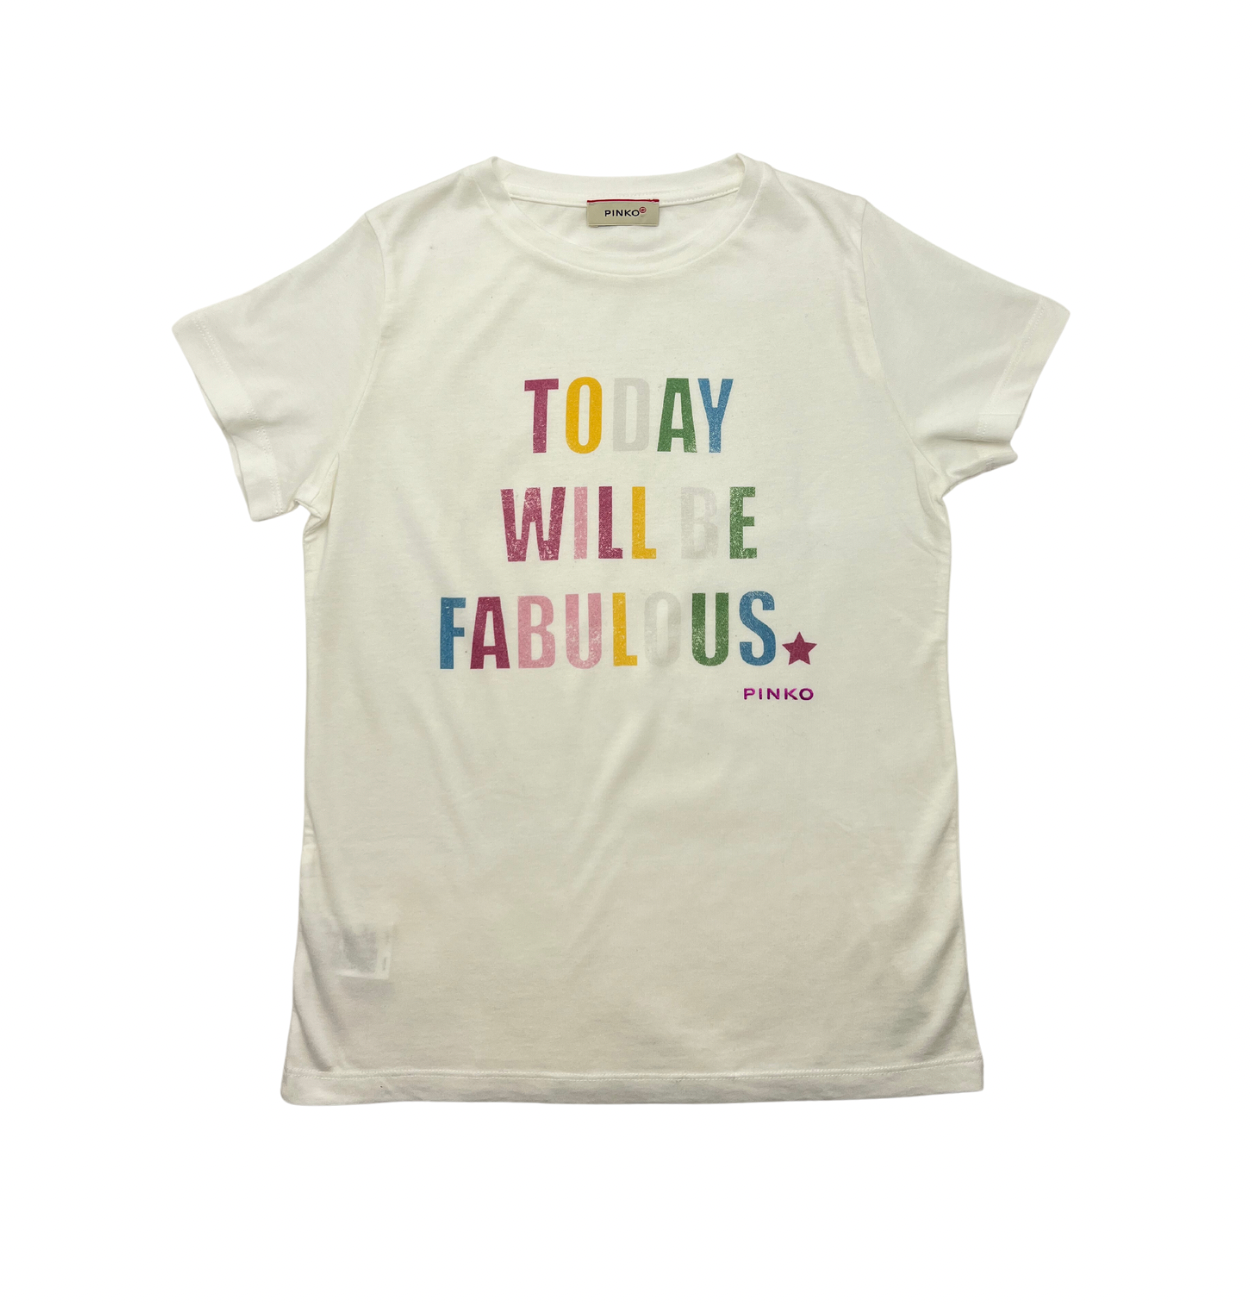 PINKO - Today will be fabulous T-shirt - 12 years old